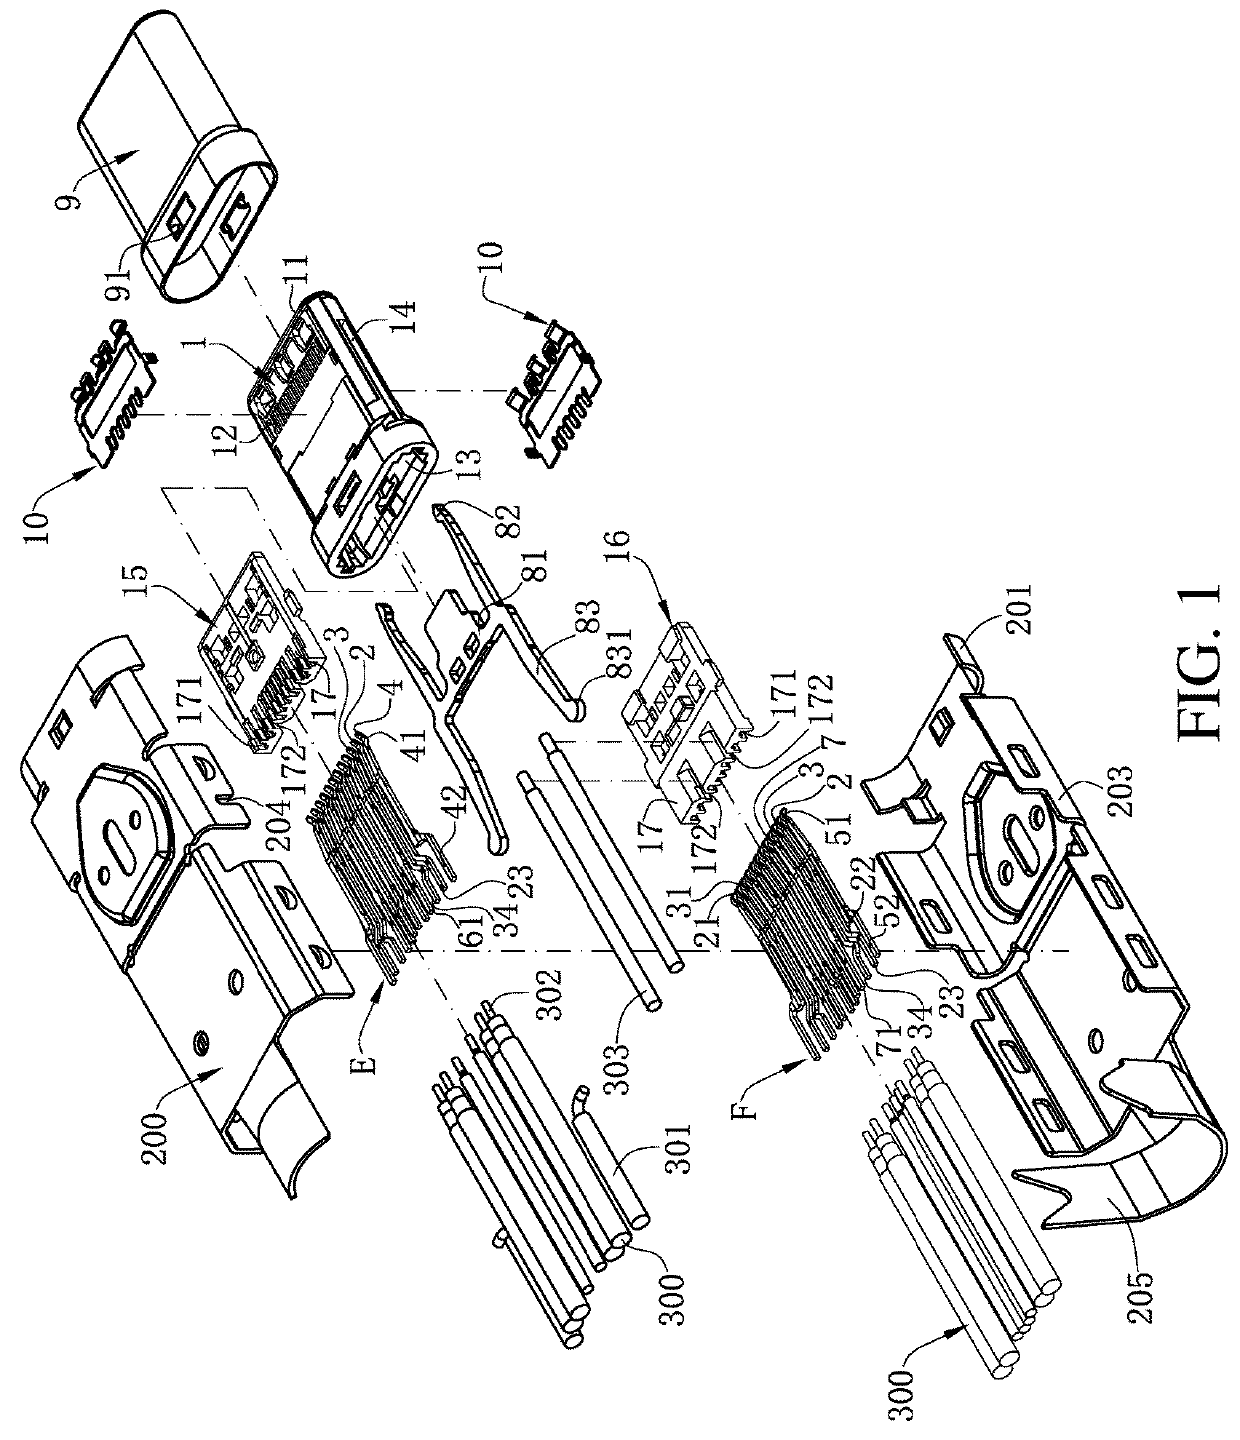 Cable connector assembly